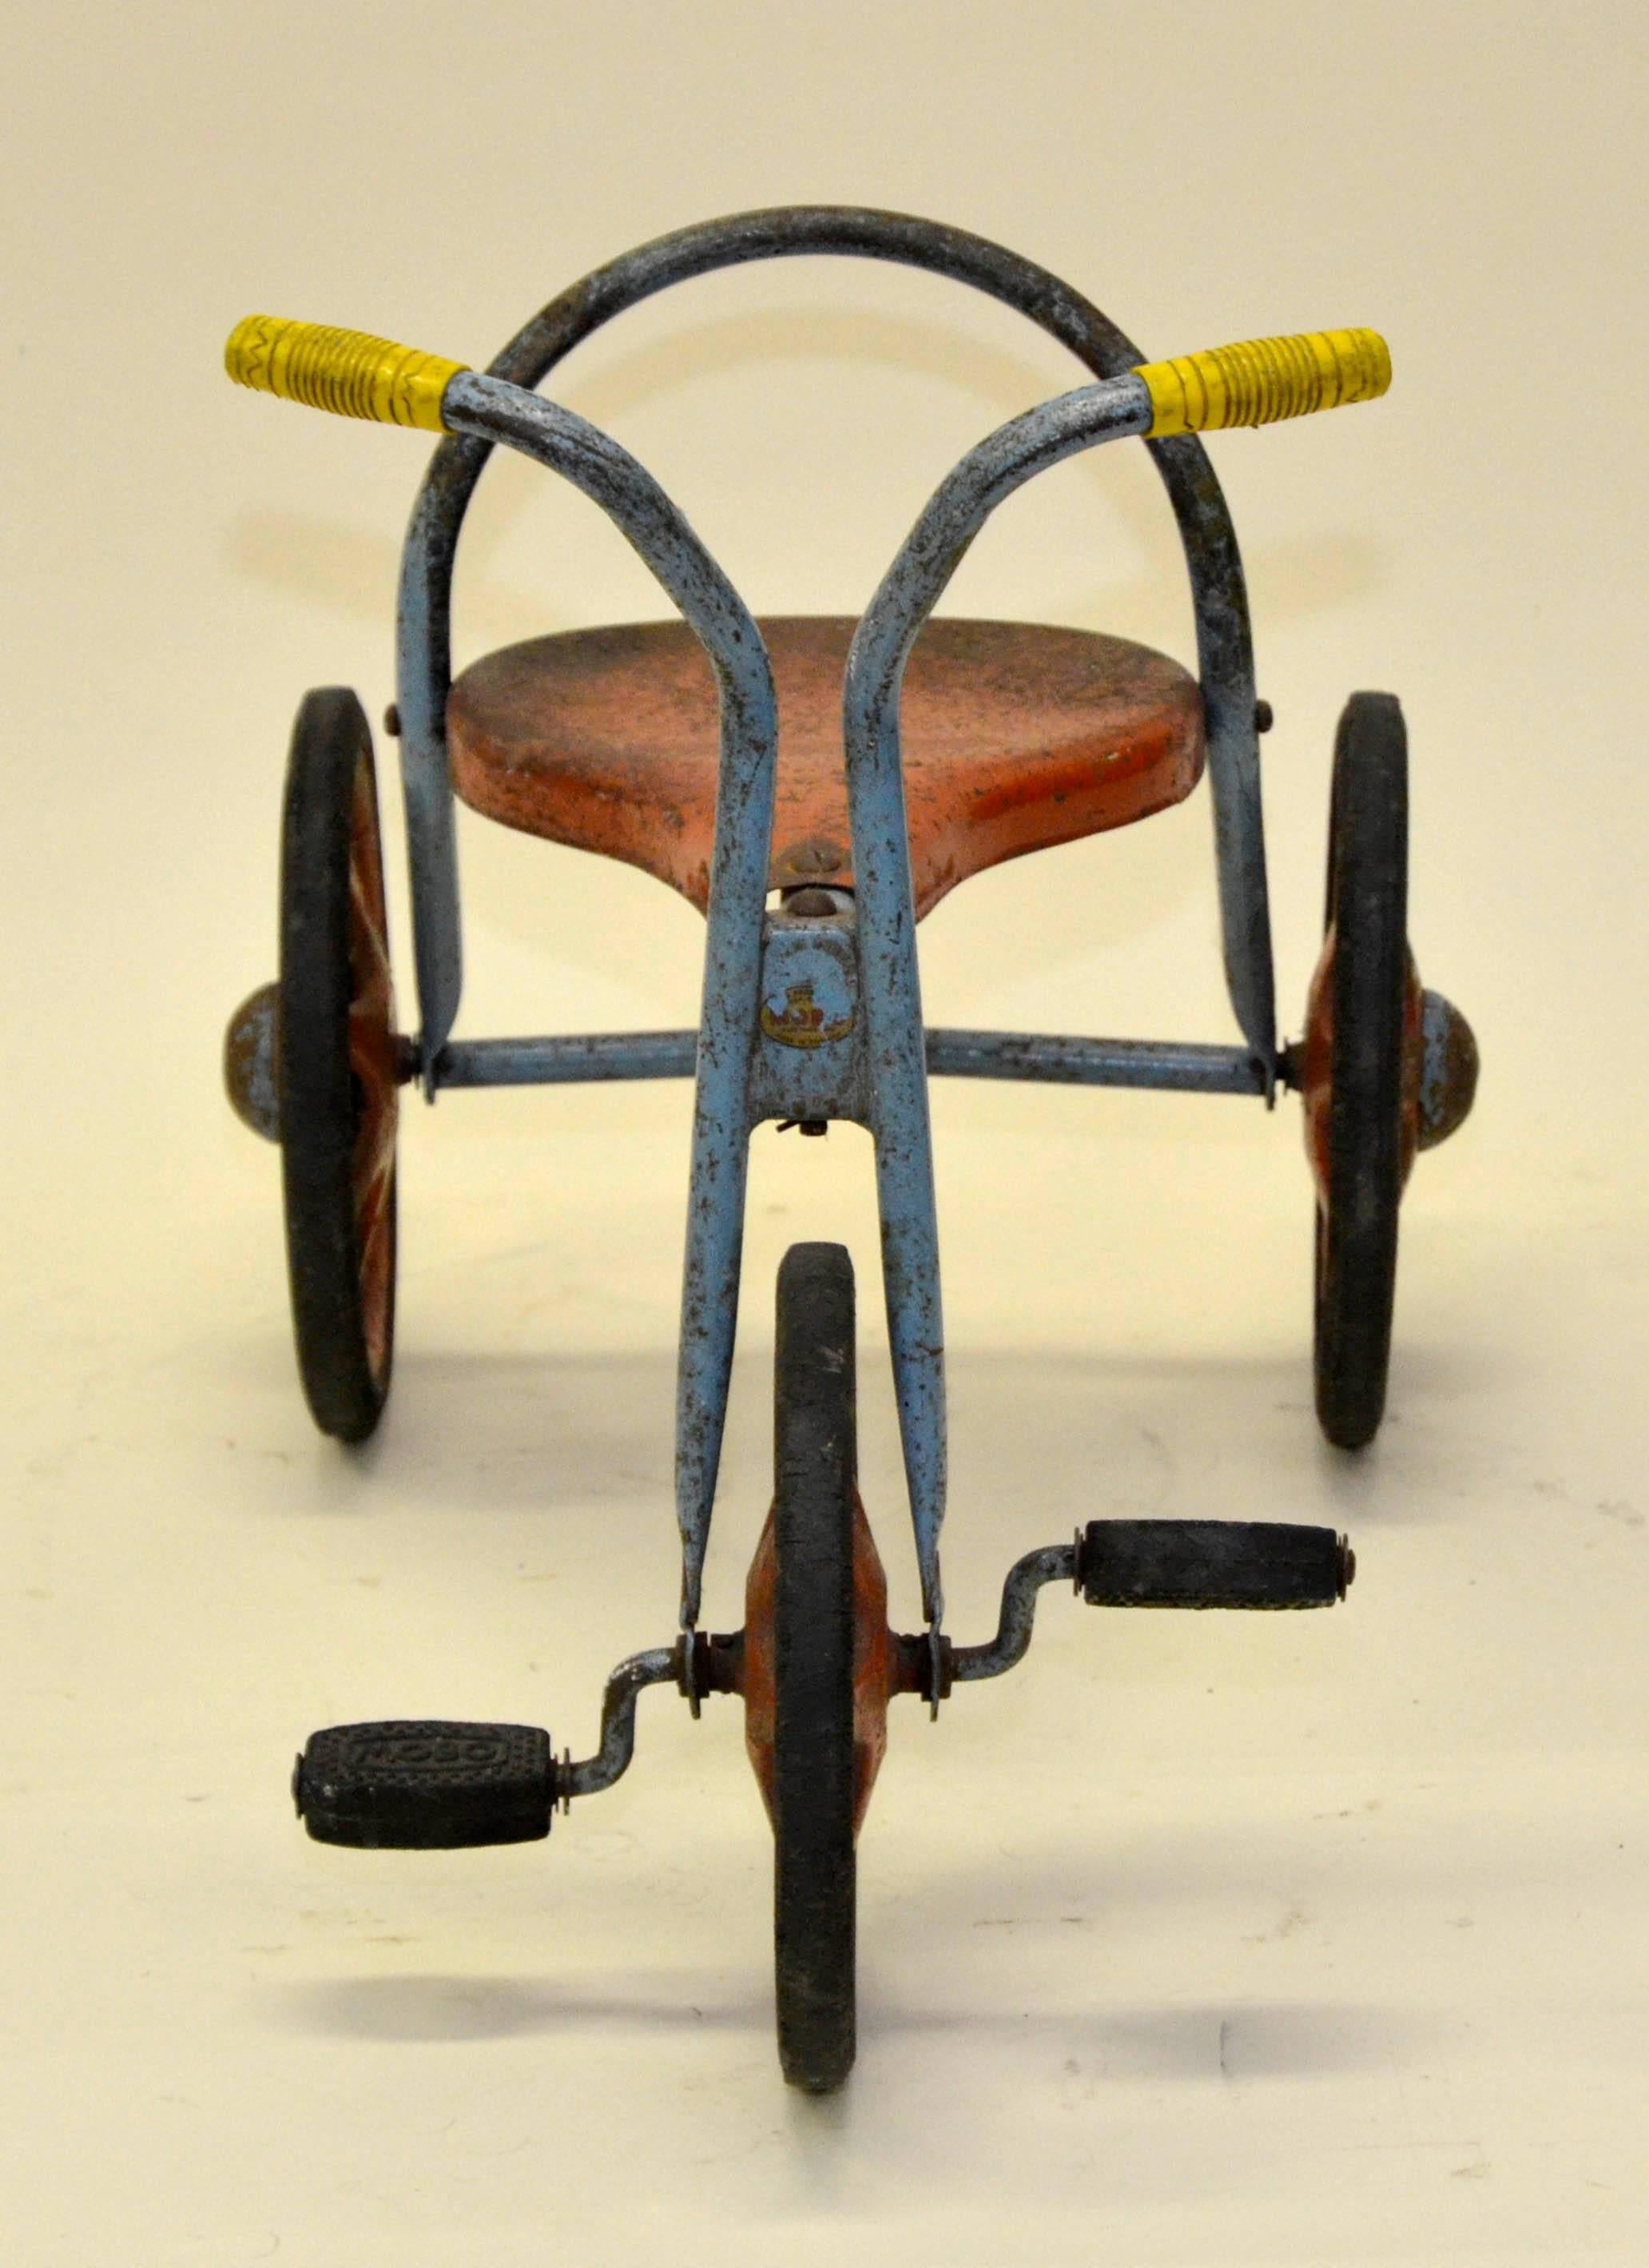 This vintage toddler's three wheeled tricycle in red, light blue and yellow color was produced by English toy manufacturer Mobo in the early 1960s.

Collector's note:

Mobo Toy's were made by D. Sebel & CO., Erith, Kent, England from 1947-1972.